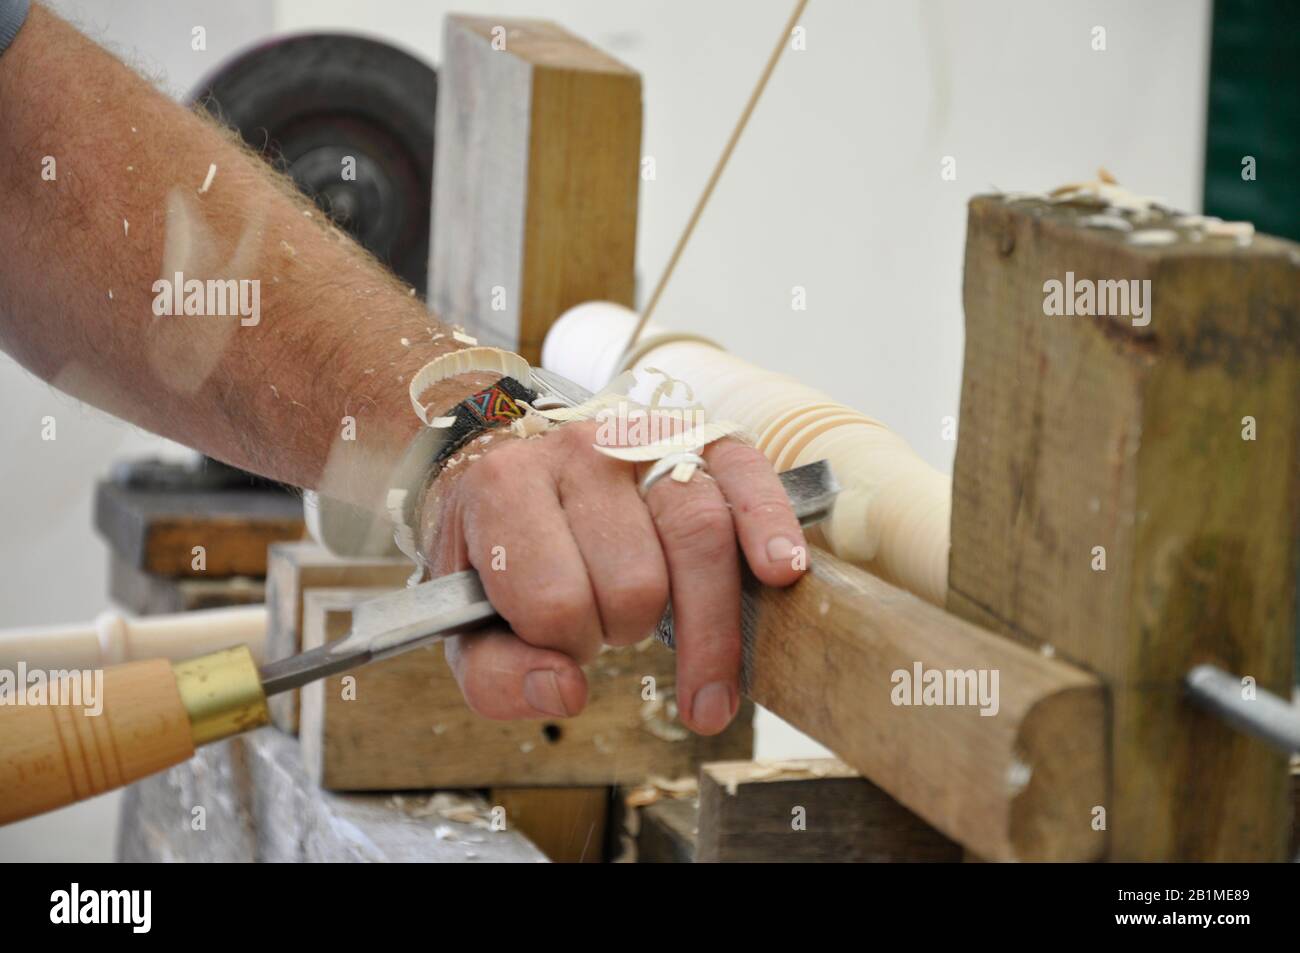 Woodturning using a bodgers pole lathe to make a traditional Windsor chair leg.Fresh unseasoned wood is turned usually in situ in the wood.Photographe Stock Photo